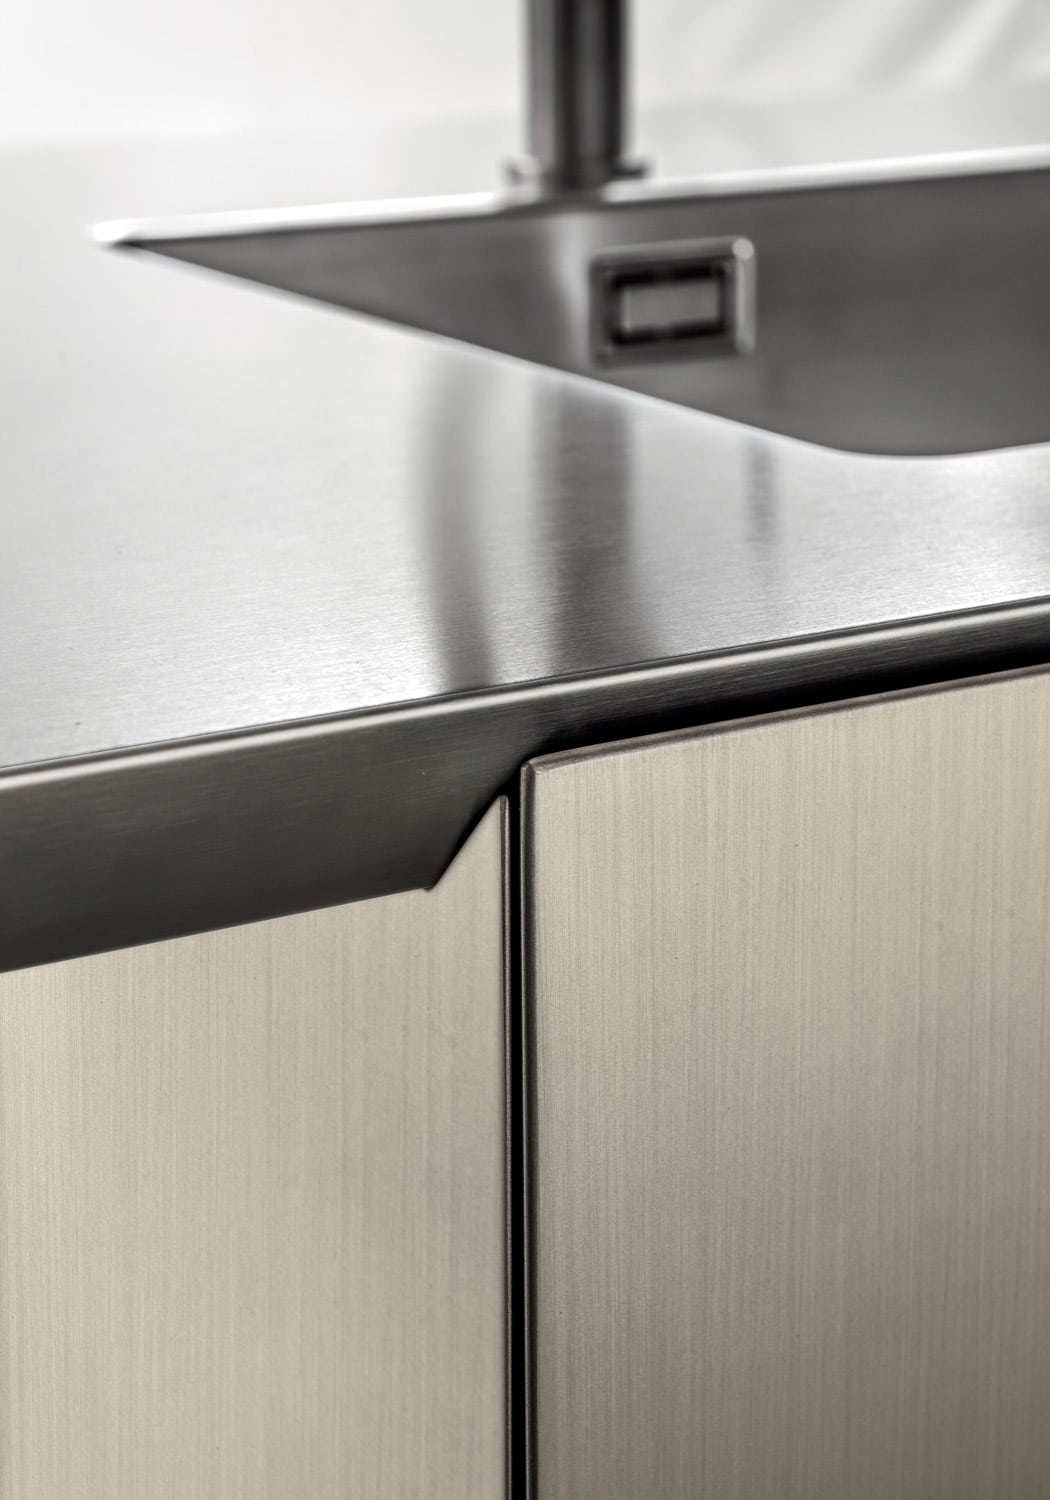 On the island, worktop and cabinet doors feature the same 45⁰ angle with a minimalistic effect.